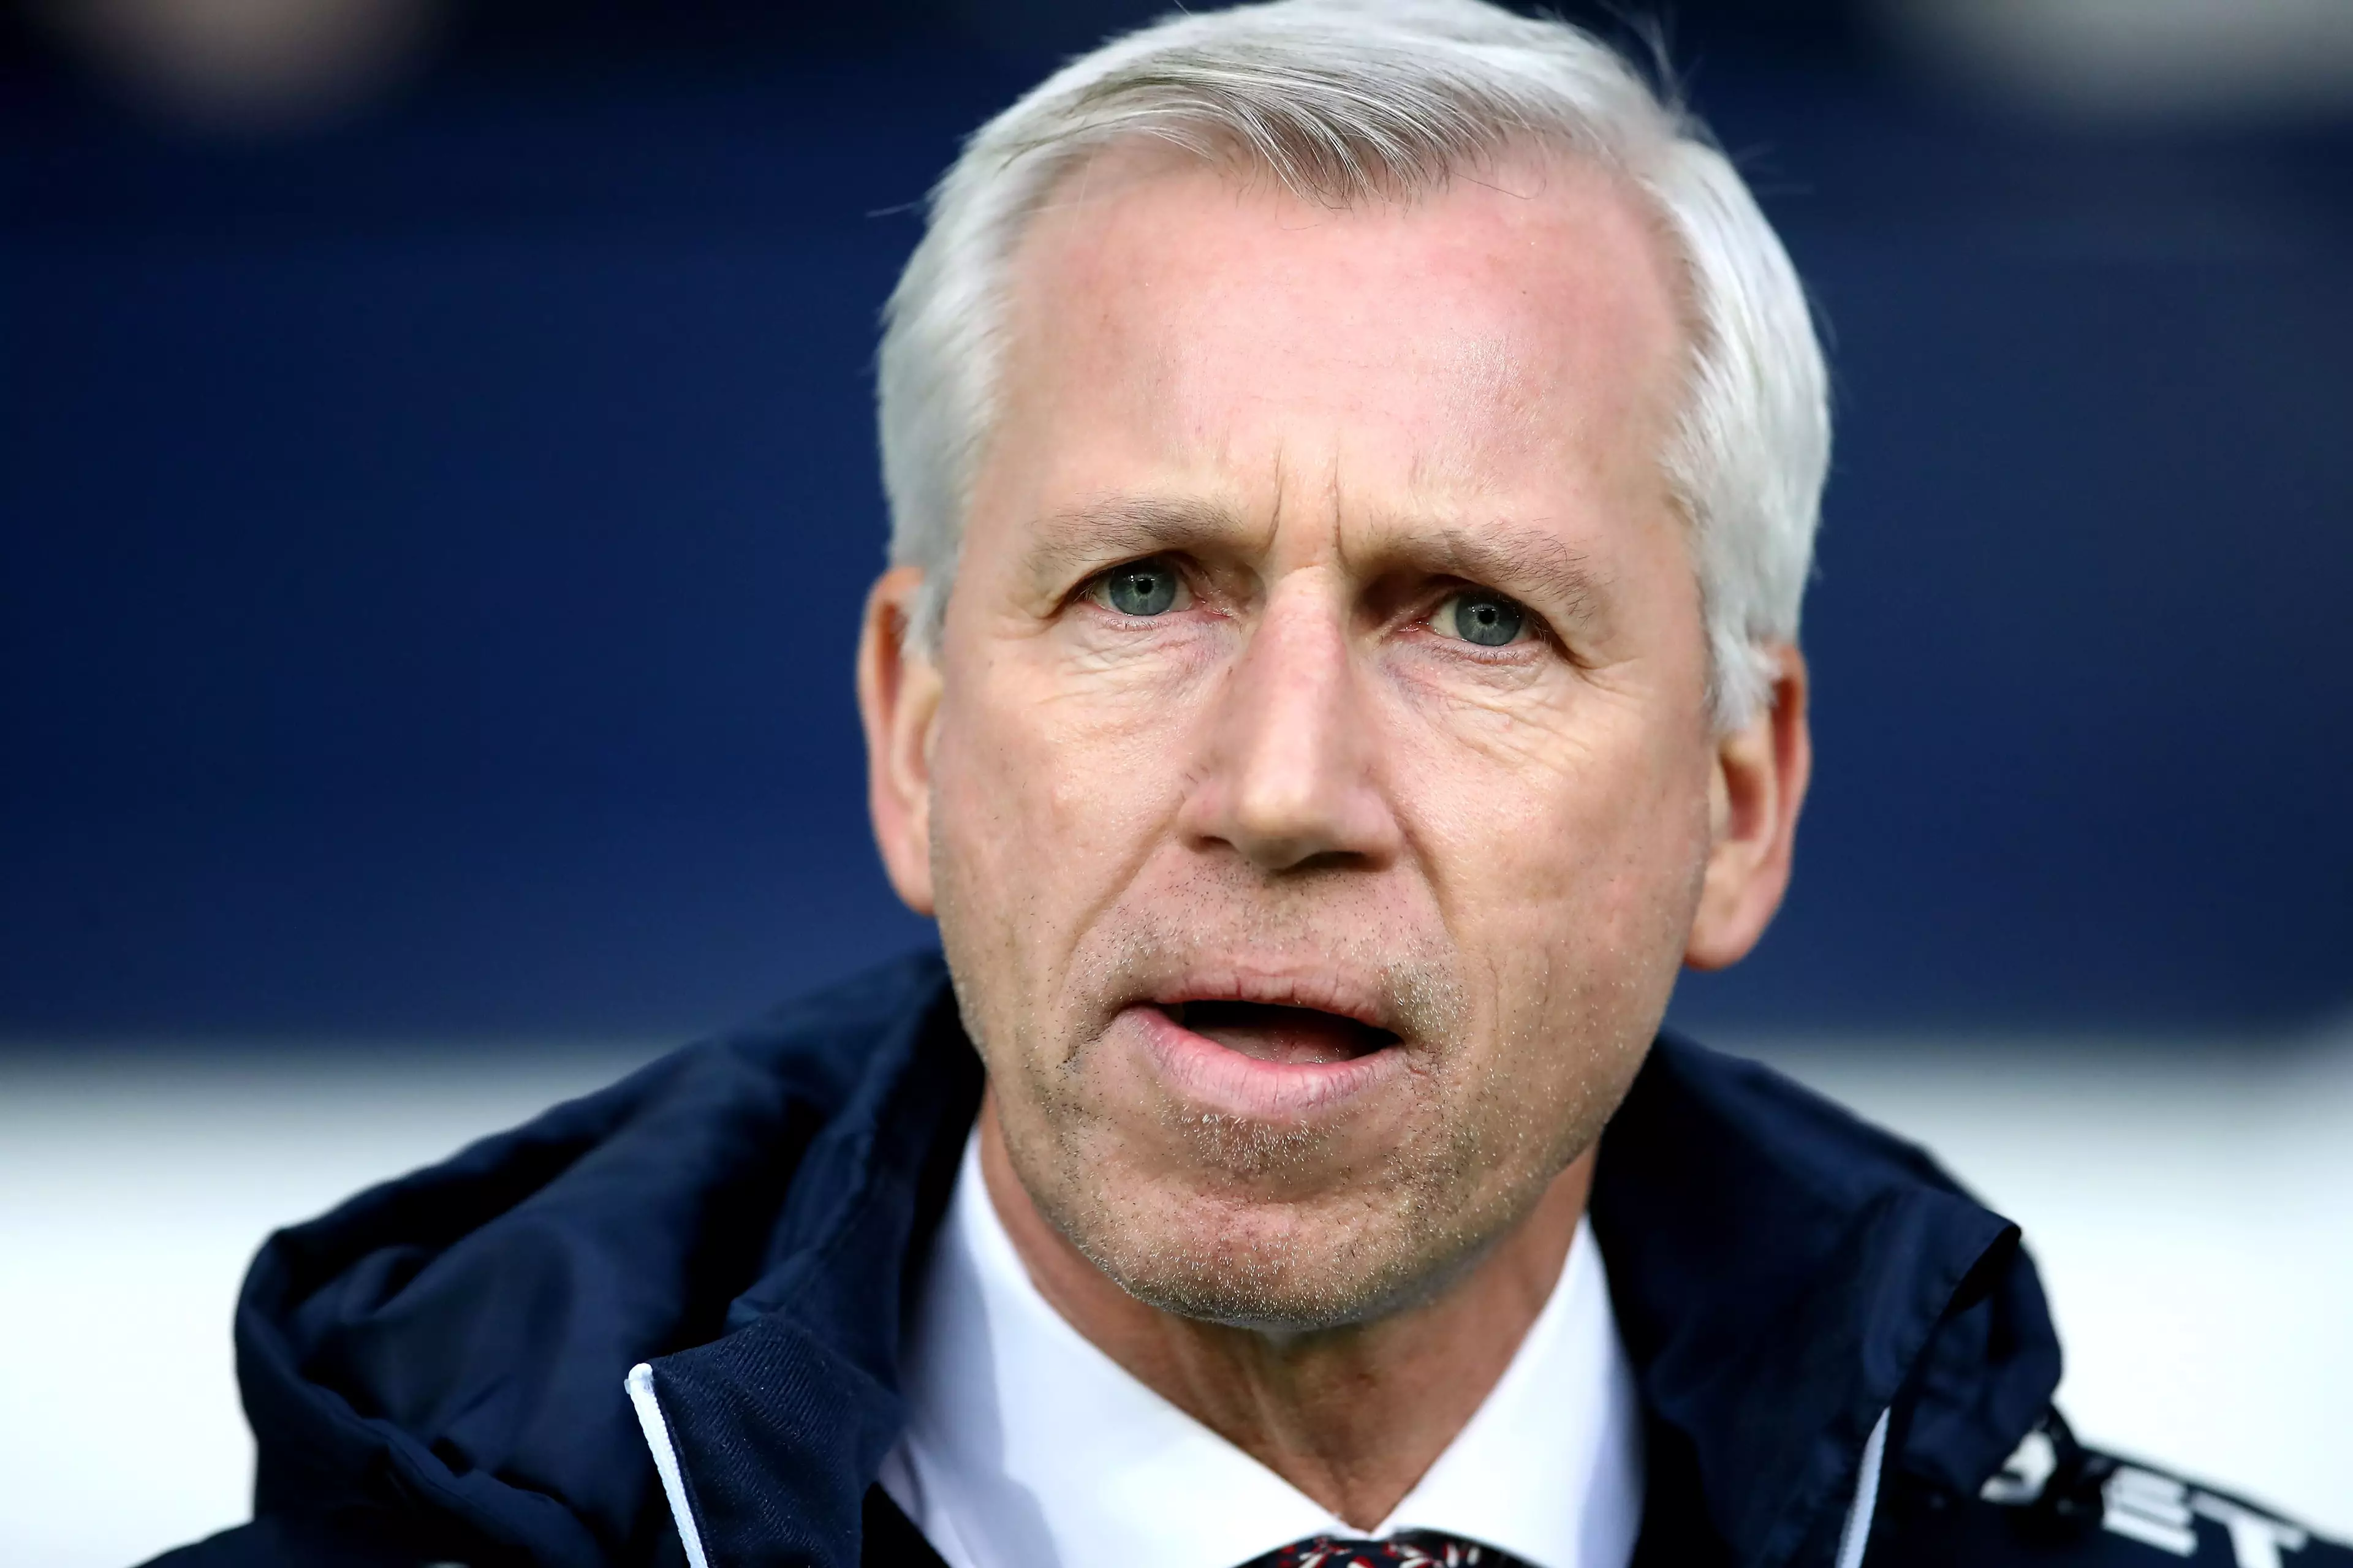 The incident in Barcelona is the last thing Alan Pardew needed. Image: PA Images.